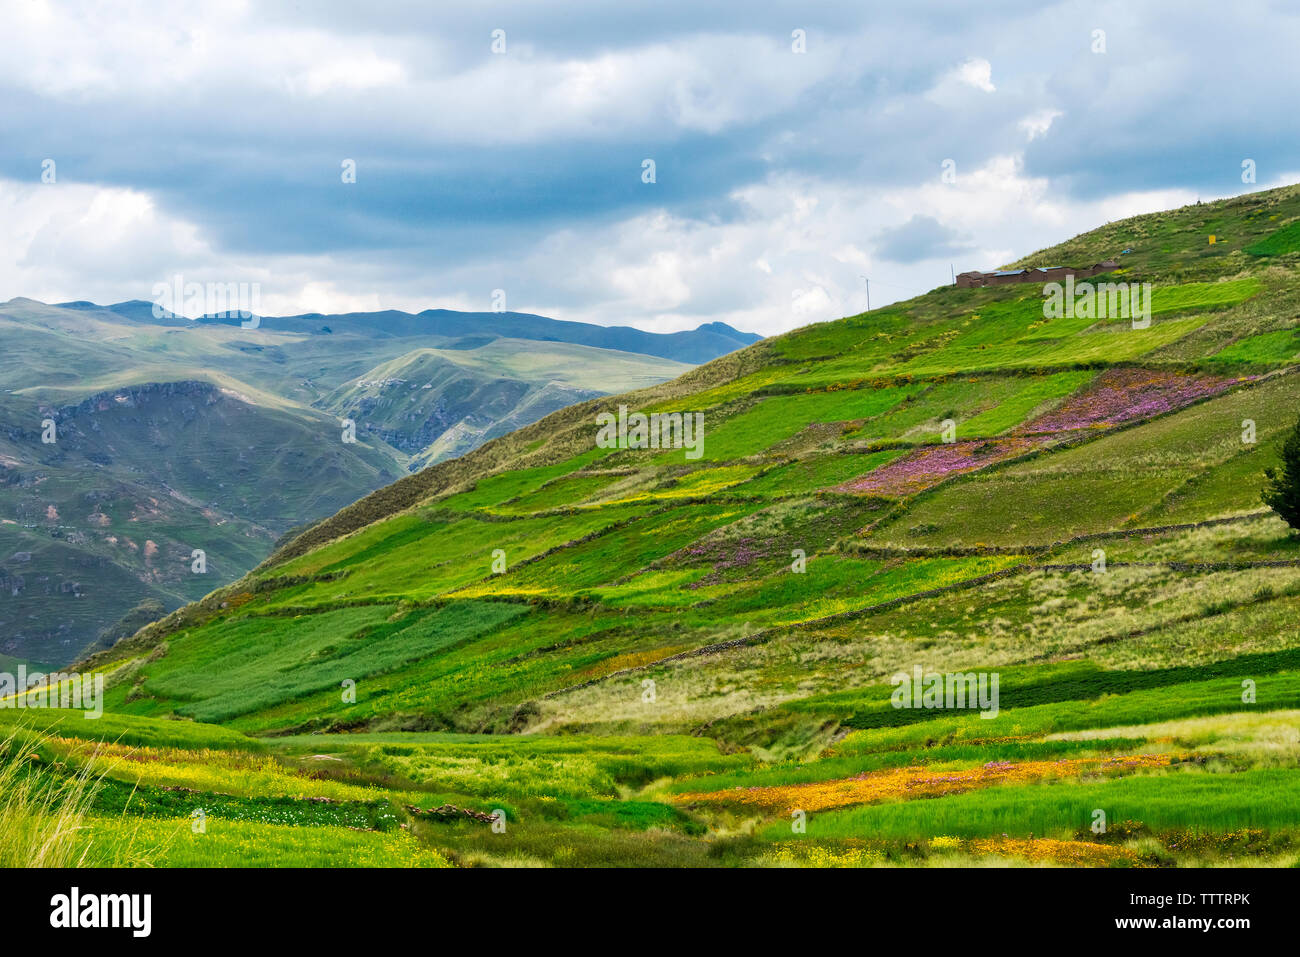 Farmland in the Andes Mountain, Quehue, Canas Province, Peru Stock Photo